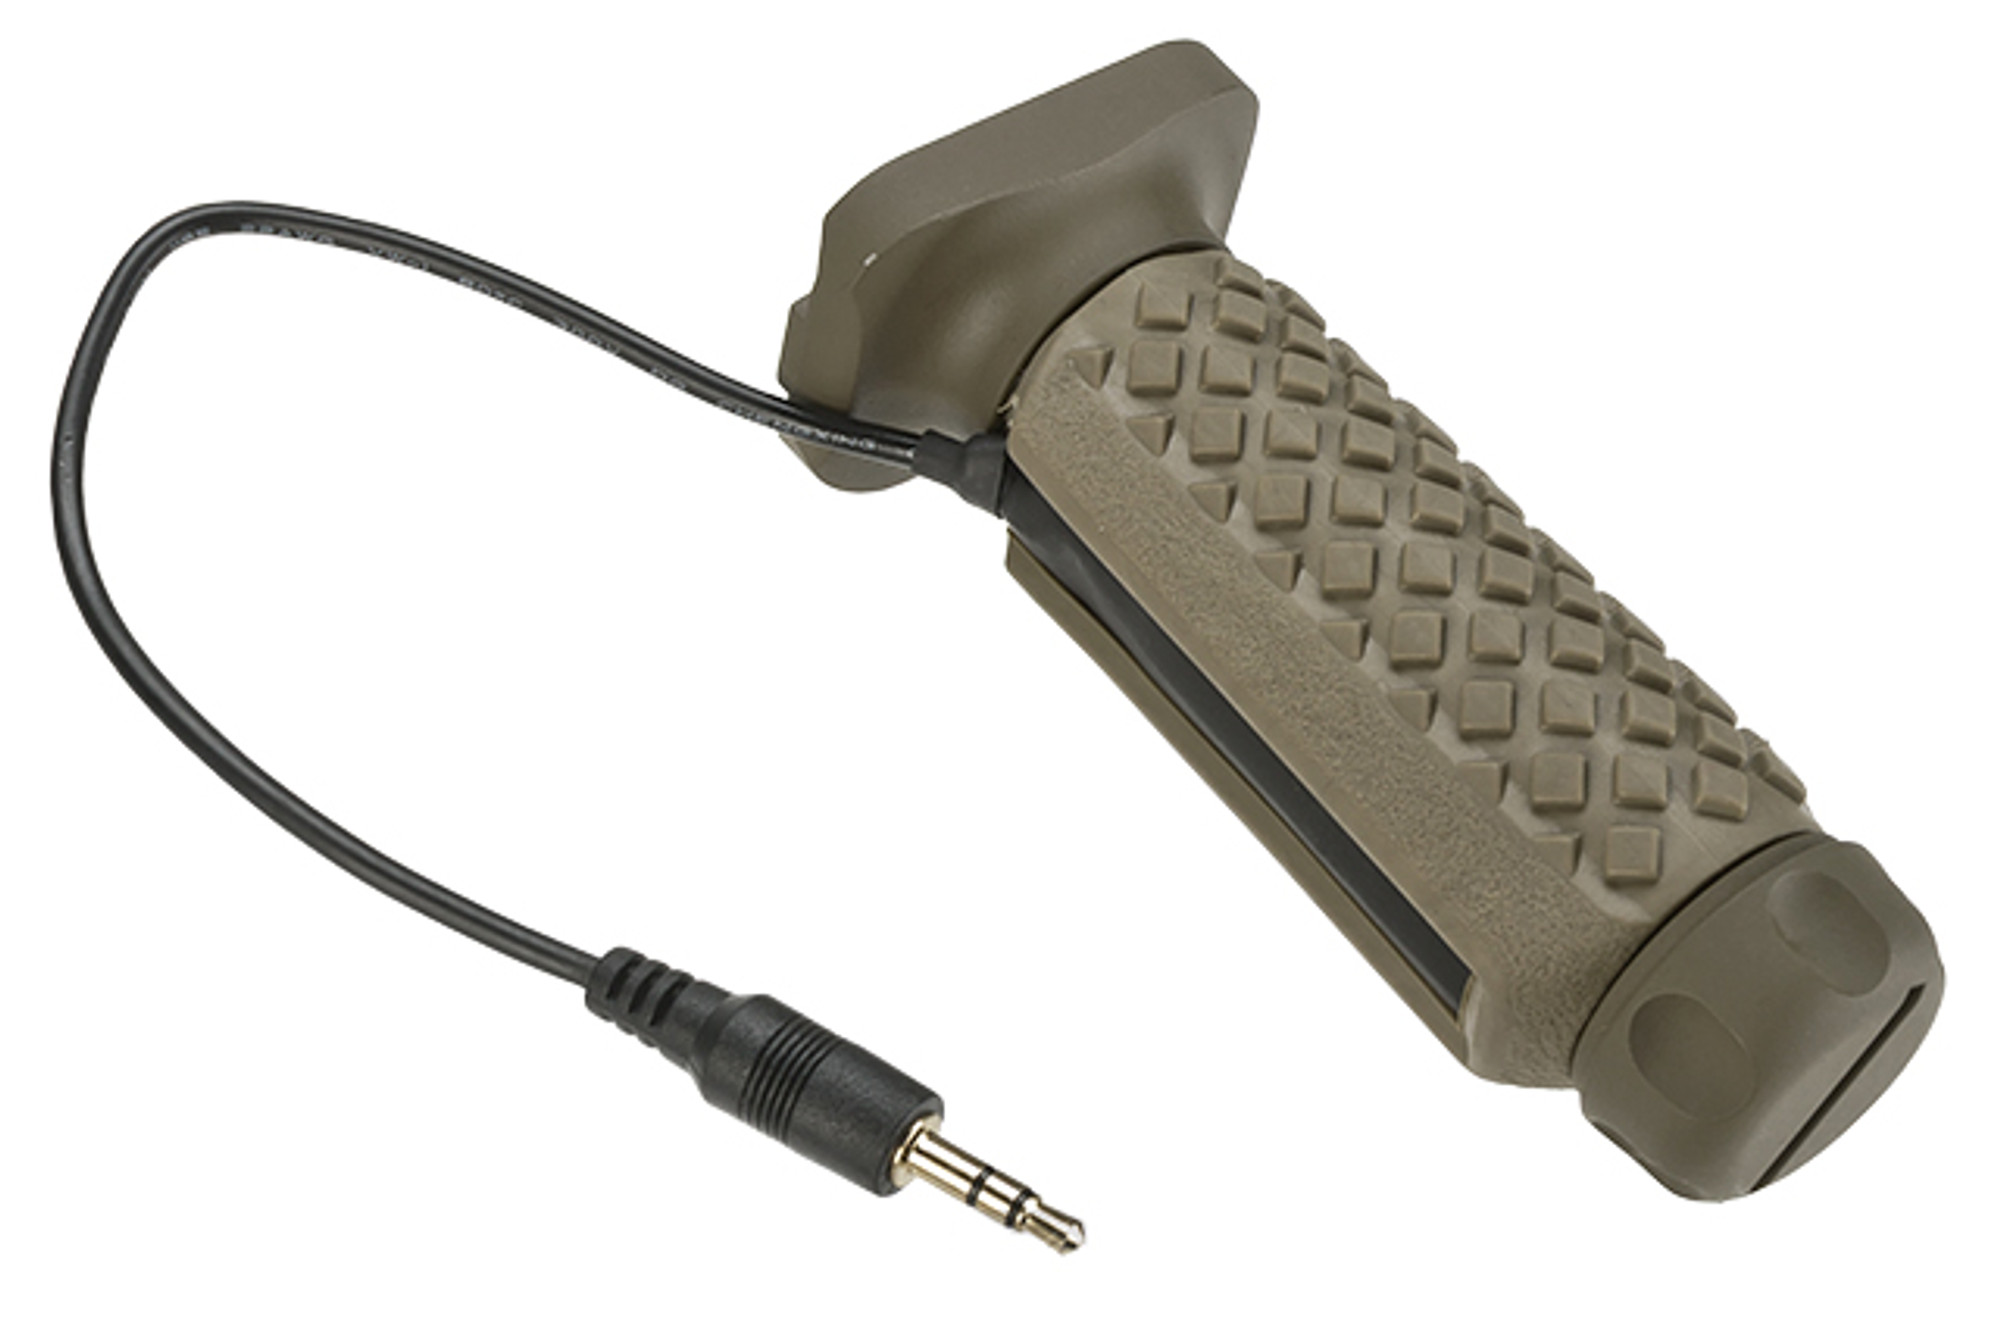 G&P Keymod Tactical Remote Switch Aluminum / Rubber Vertical Grip - Sand w/ Switch (Long)